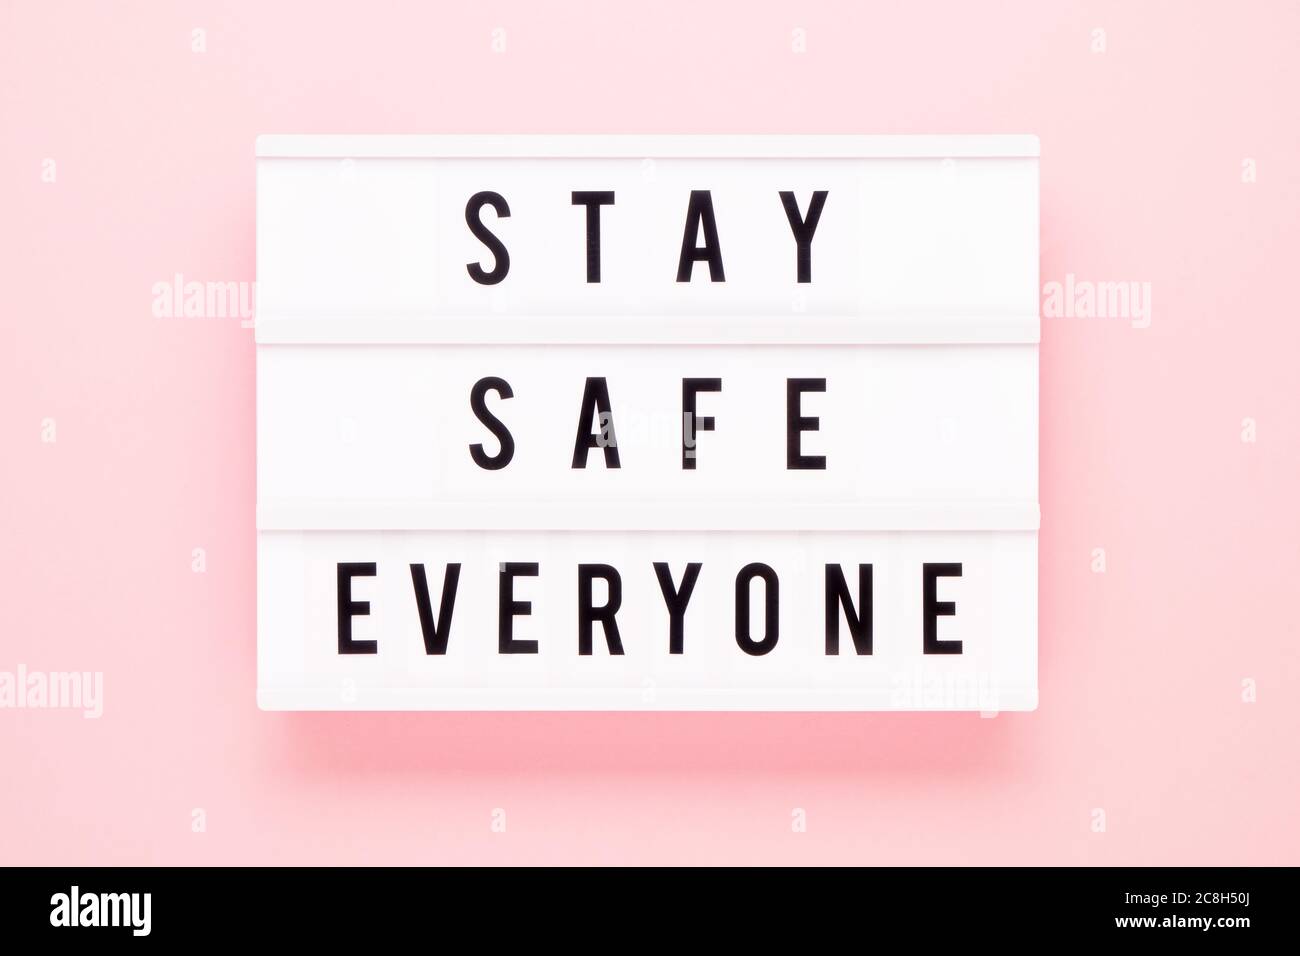 STAY SAFE EVERYONE written in lightbox on pink background. Healthcare and medical concept. Top view. Quarantine concept. Stock Photo